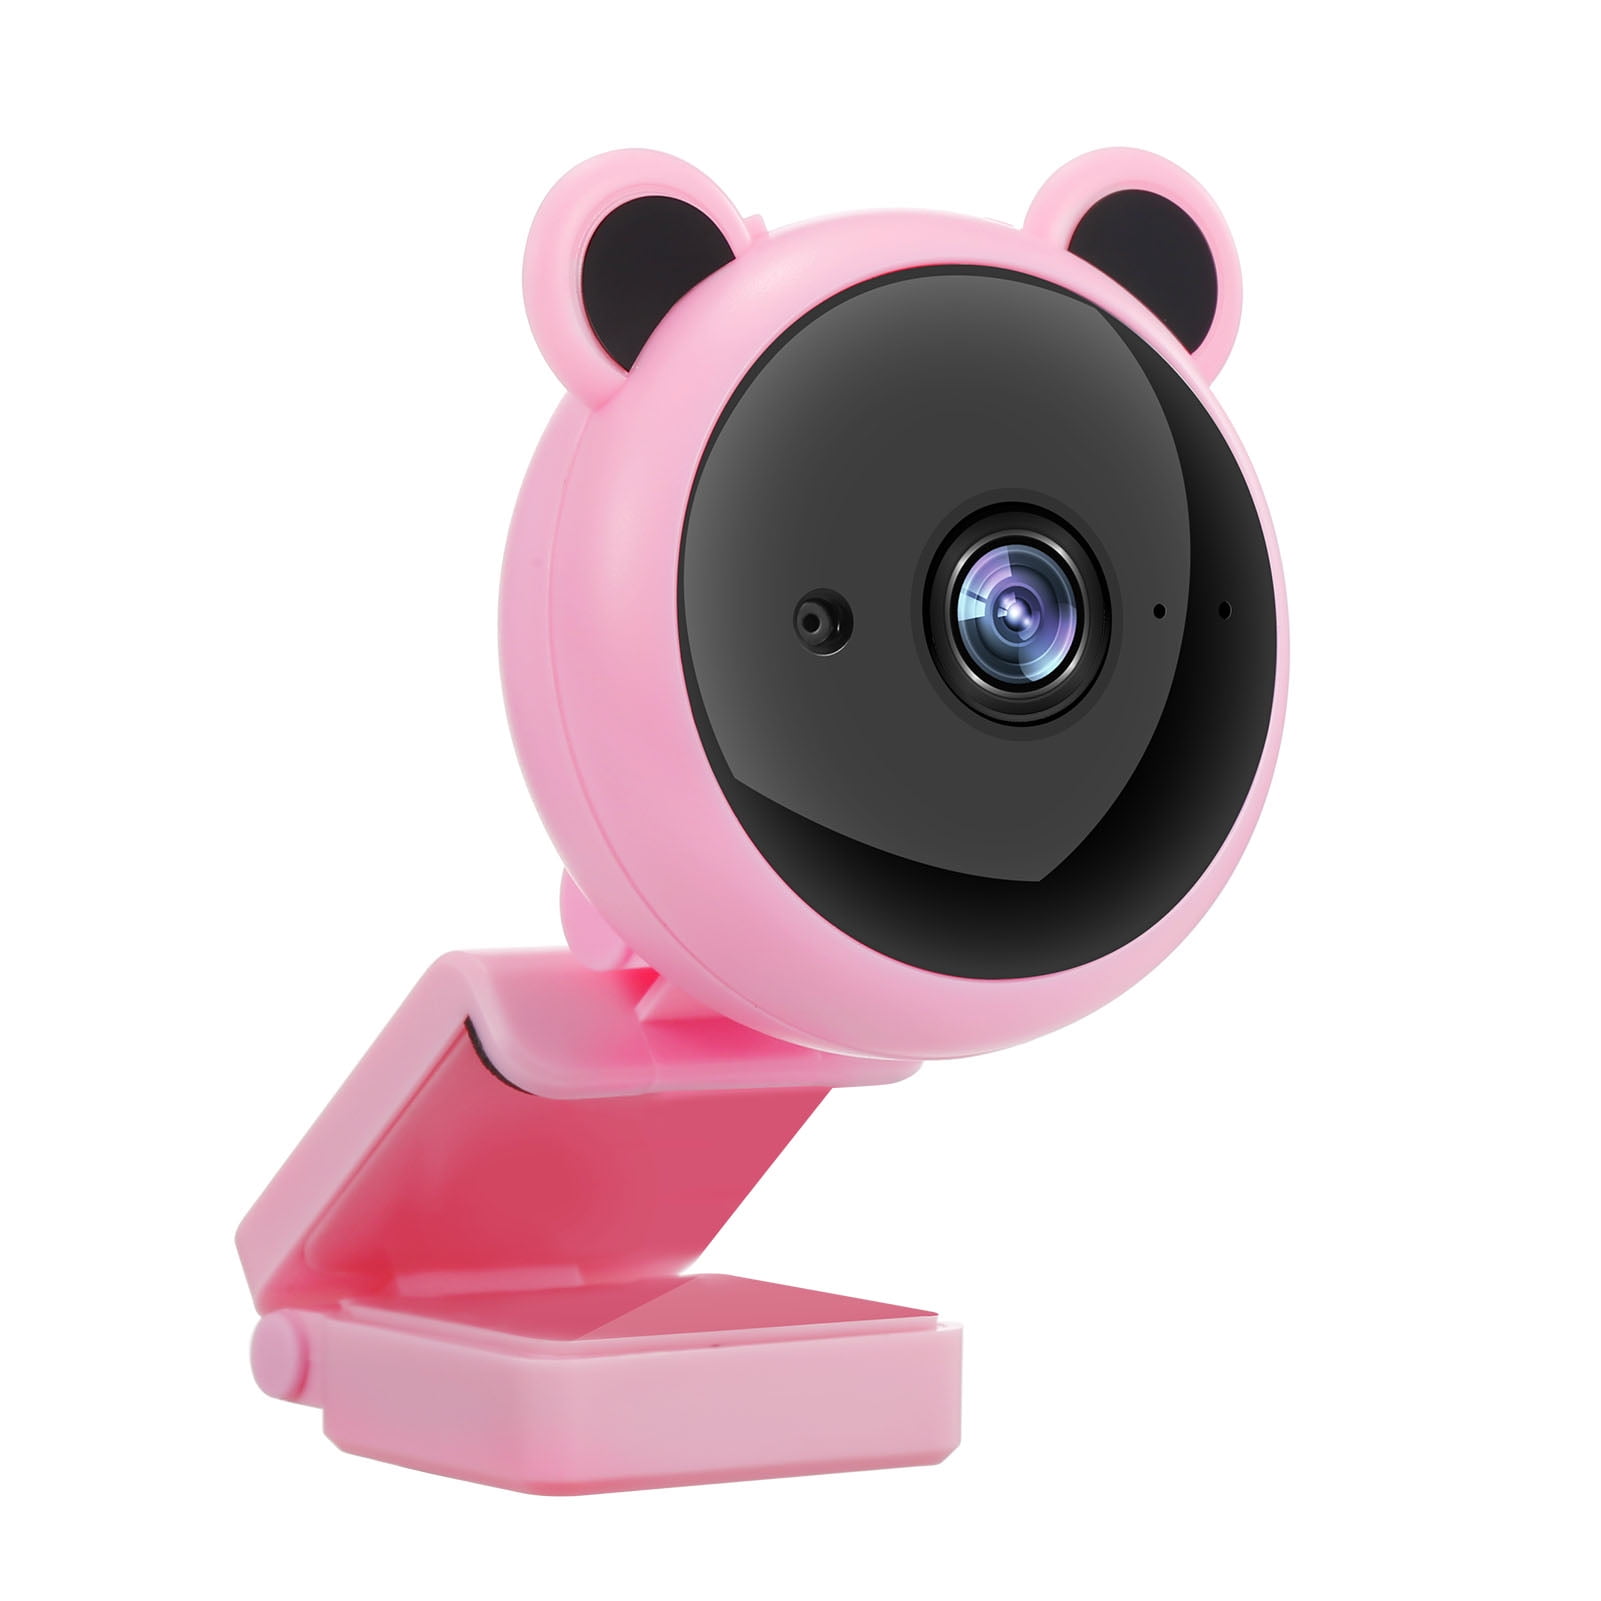 USB Webcam with 3D Denoising and Automatic Gain 1080p Webcam for Video Calling Webcam with Microphone Webcam Online Classes and Video Conference